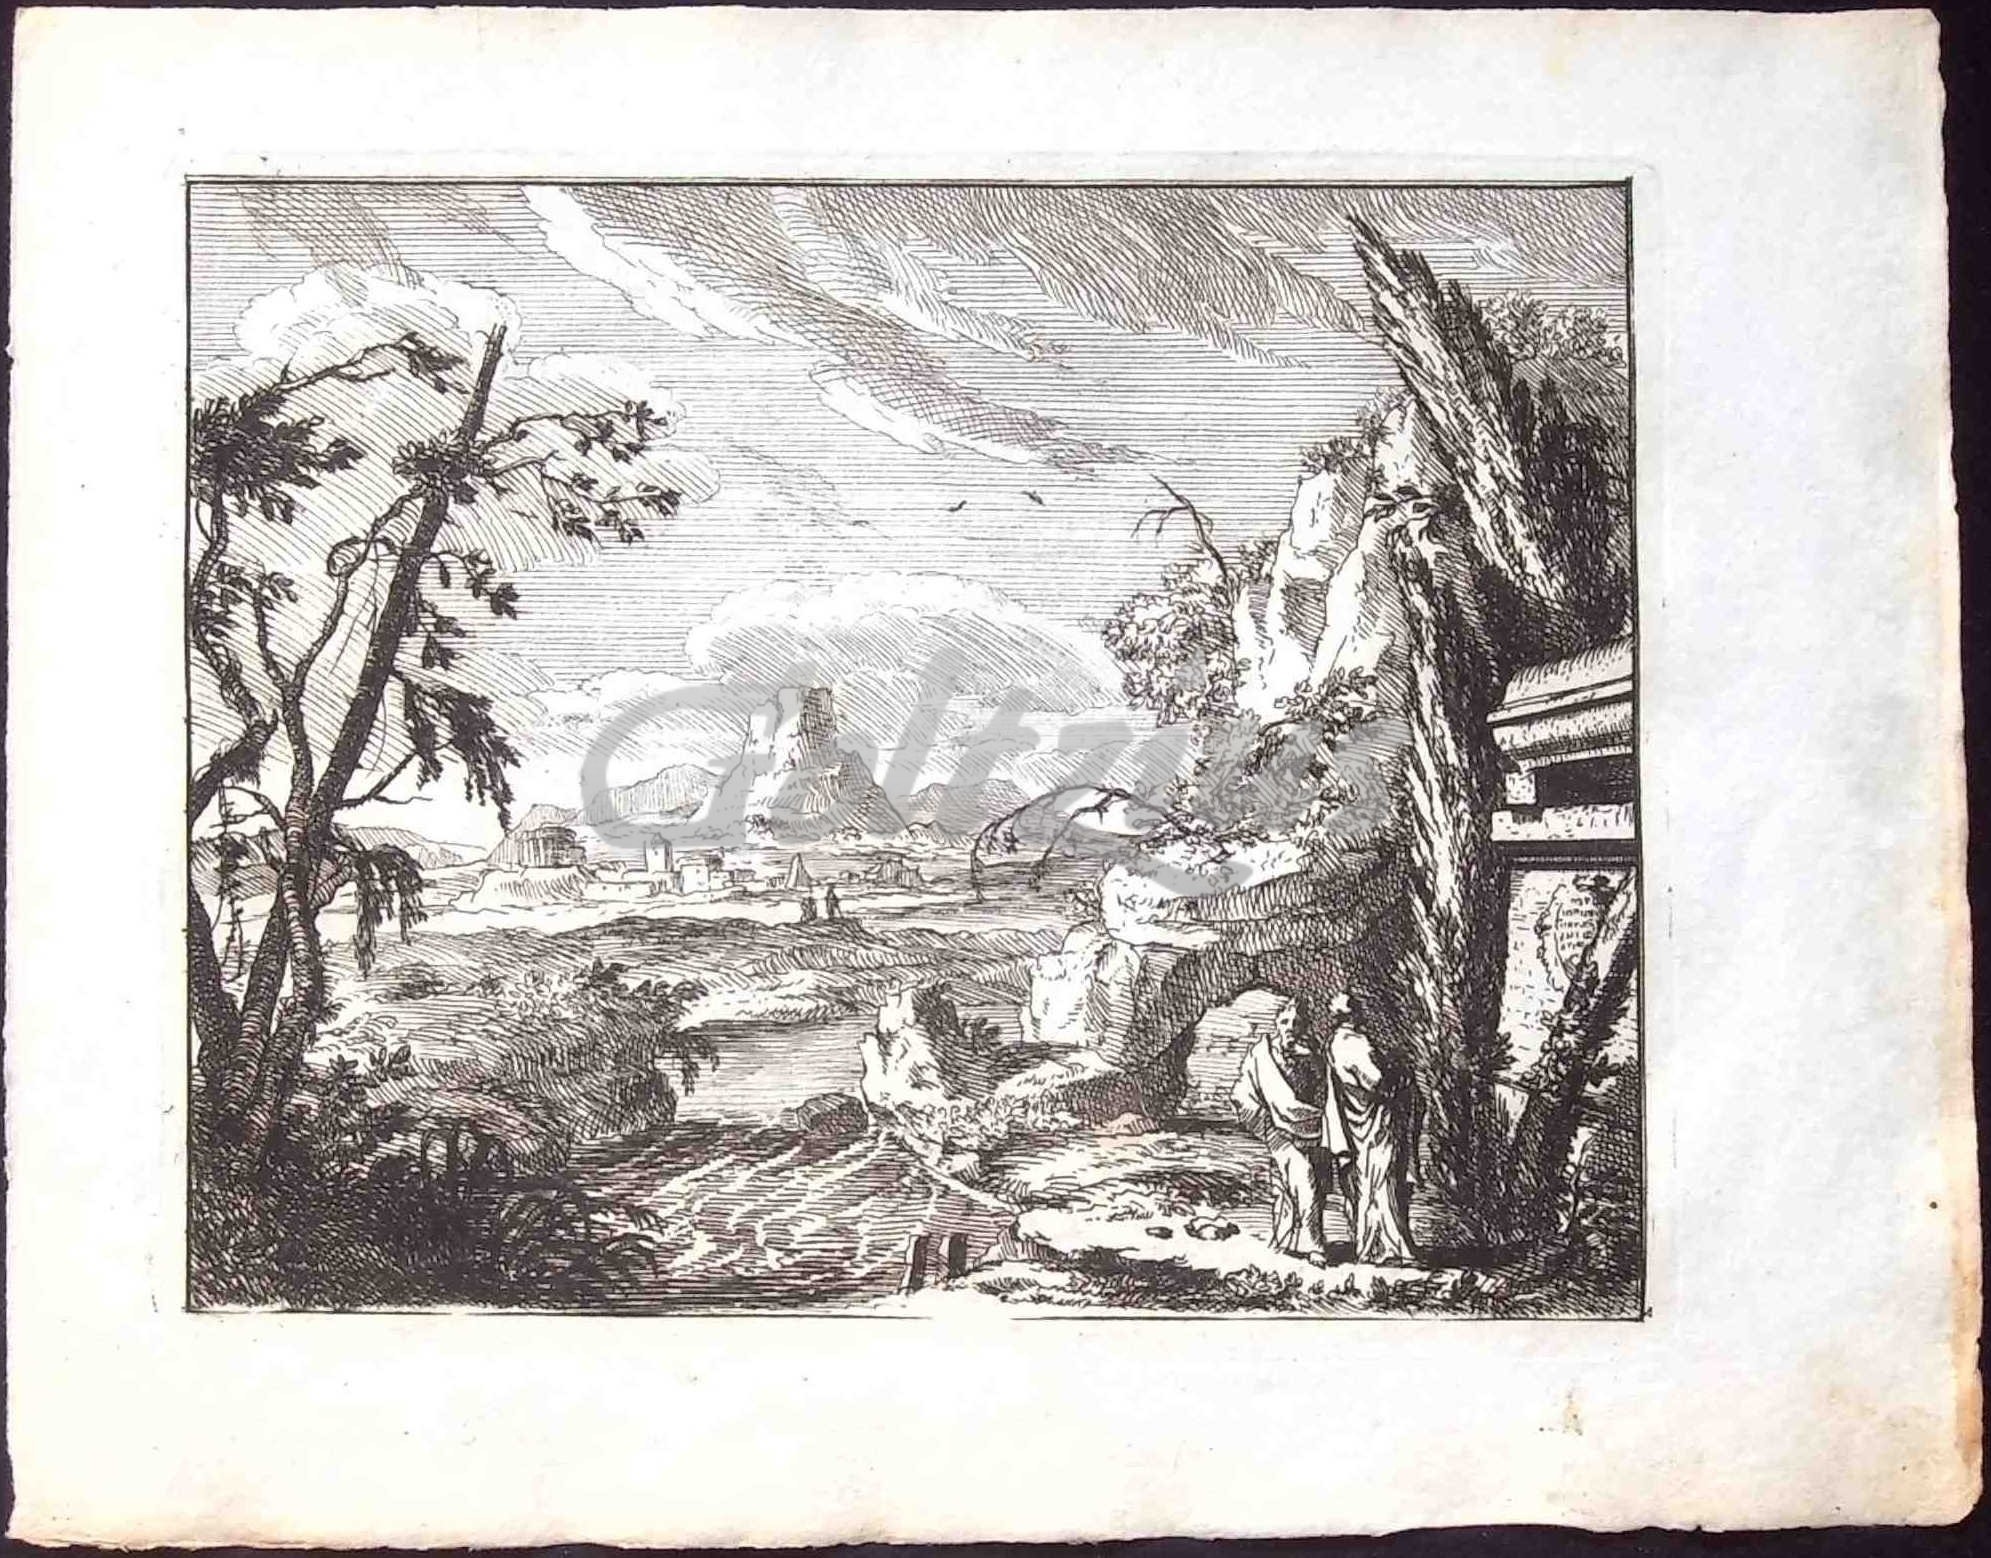 ANONYMOUS, Landscape with two men by a sepulchre